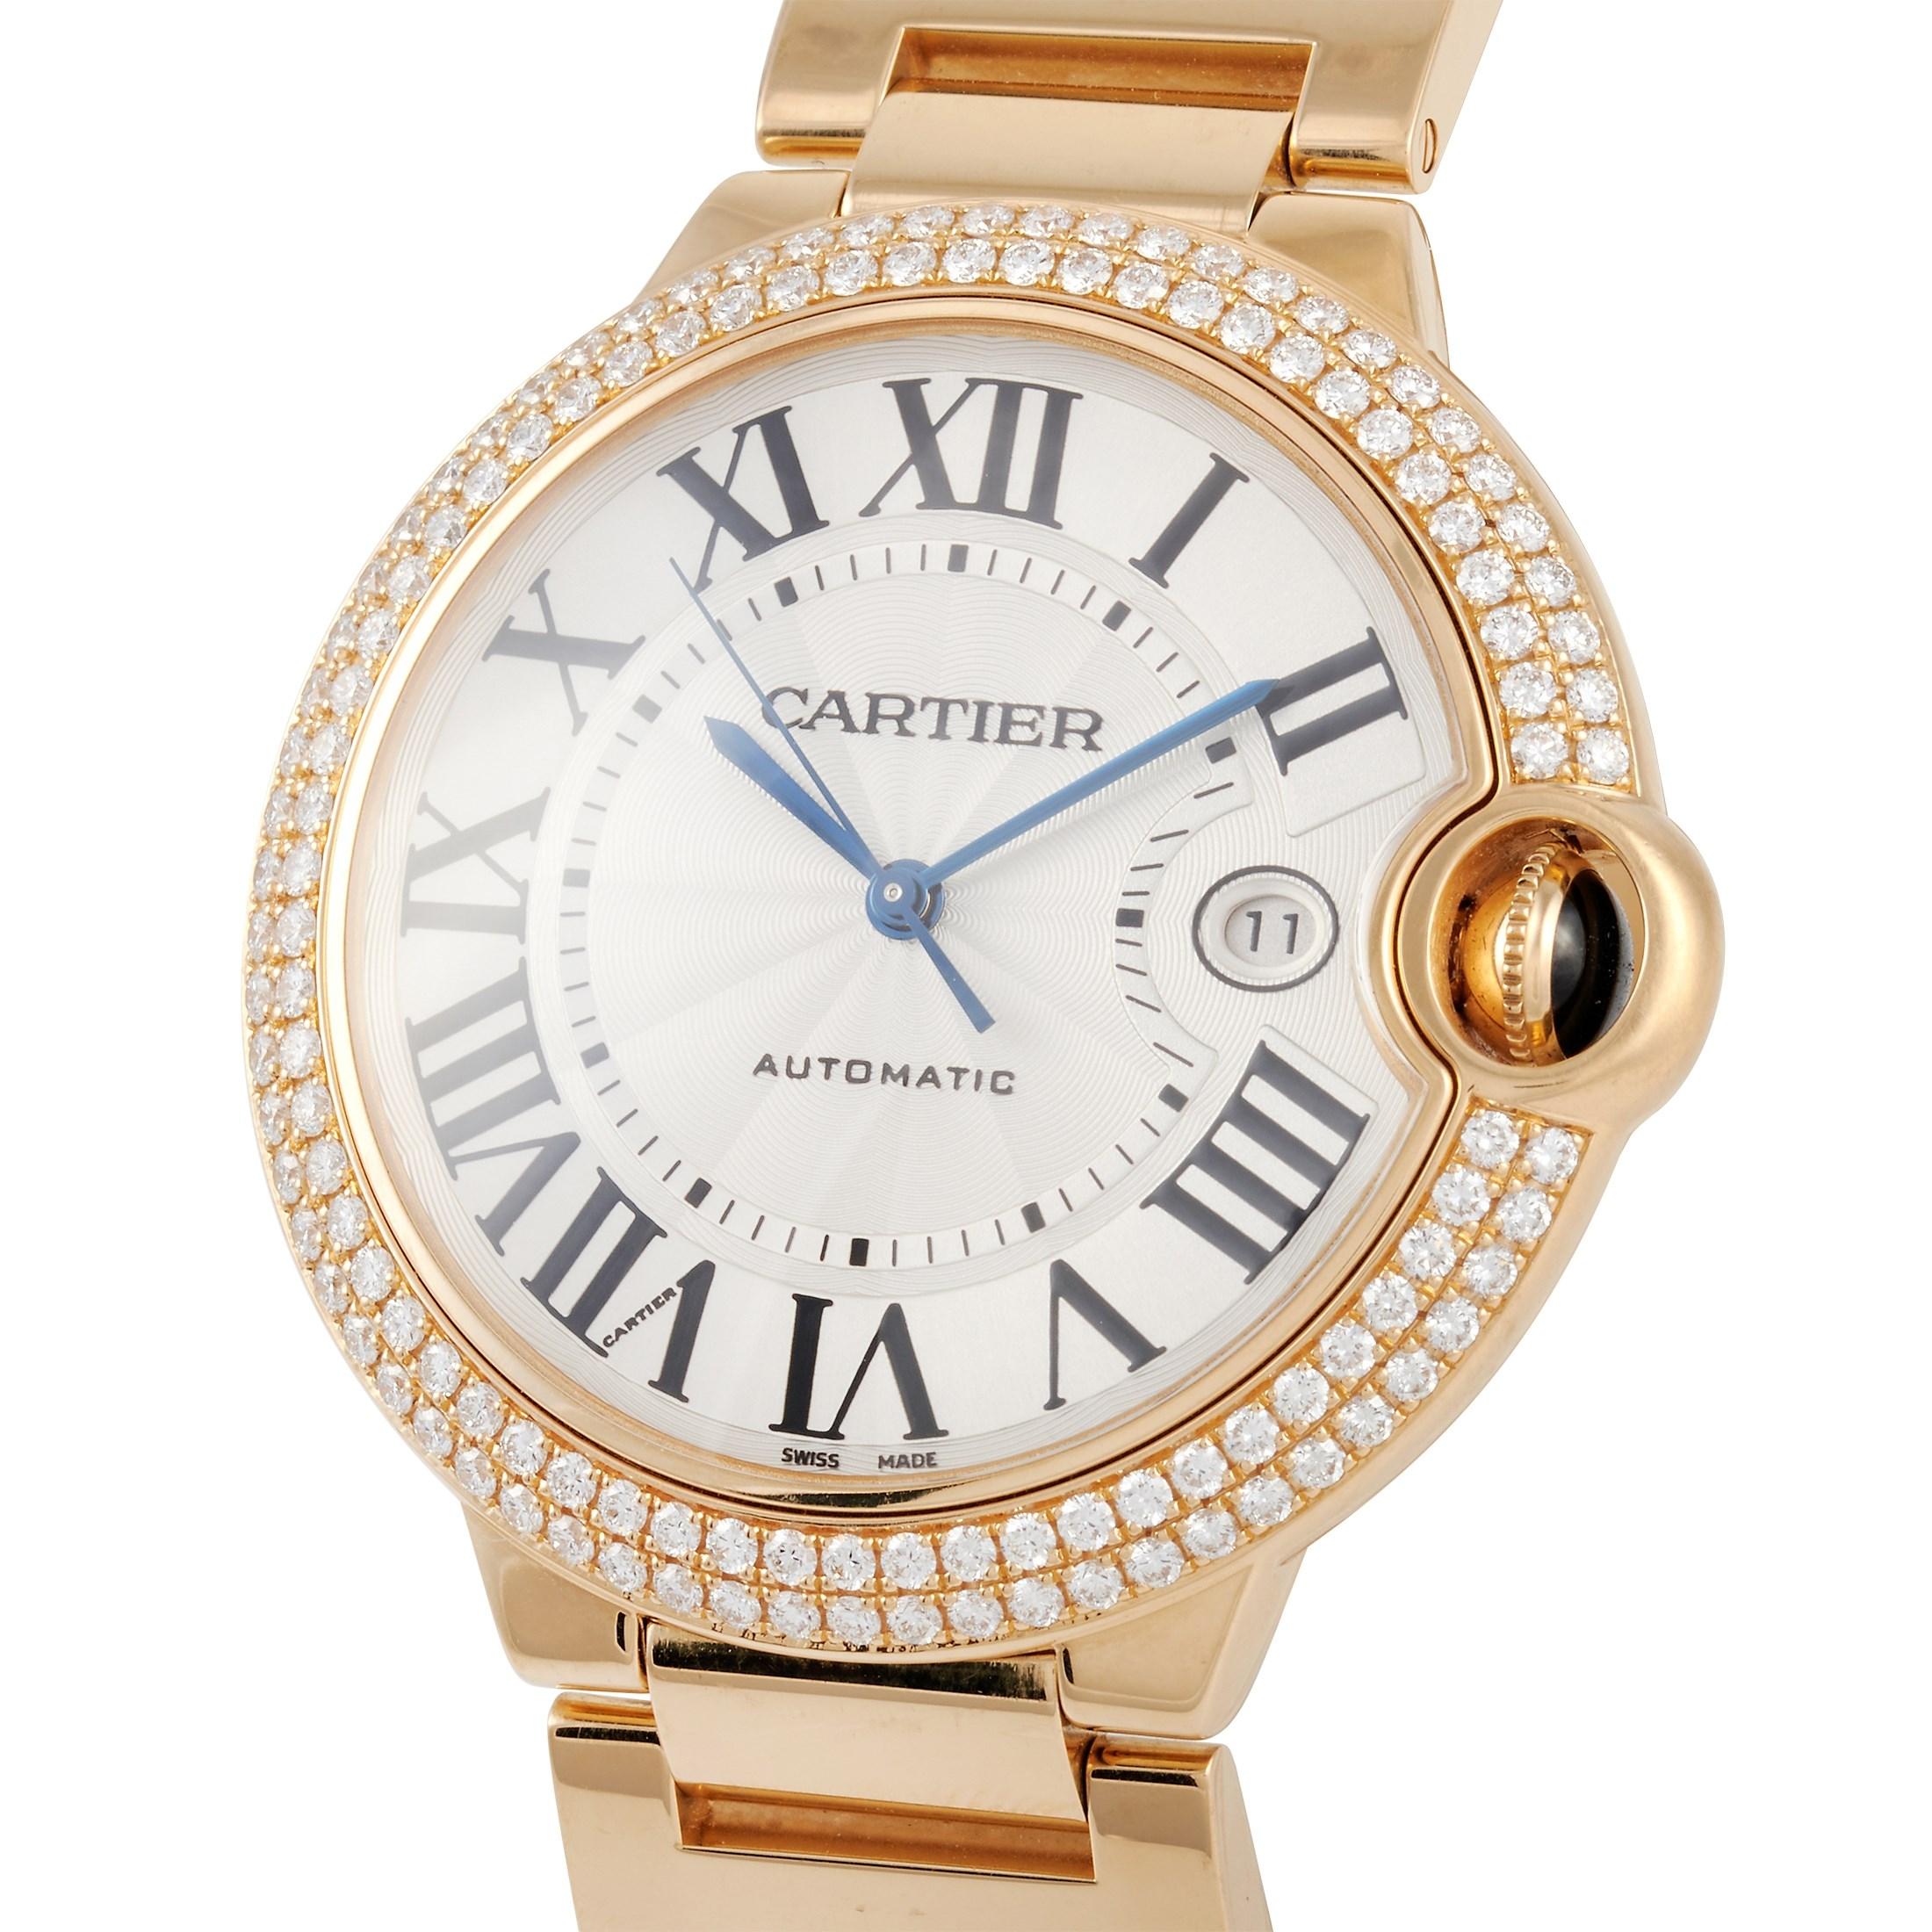 This Cartier Ballon Bleu 18K Rose Gold 42 mm Men's Watch, reference number WE9008Z3, comes with an 18K white gold case that measures 42 mm in diameter. The case is presented on a matching rose gold bracelet with deployment clasp. The diamond set